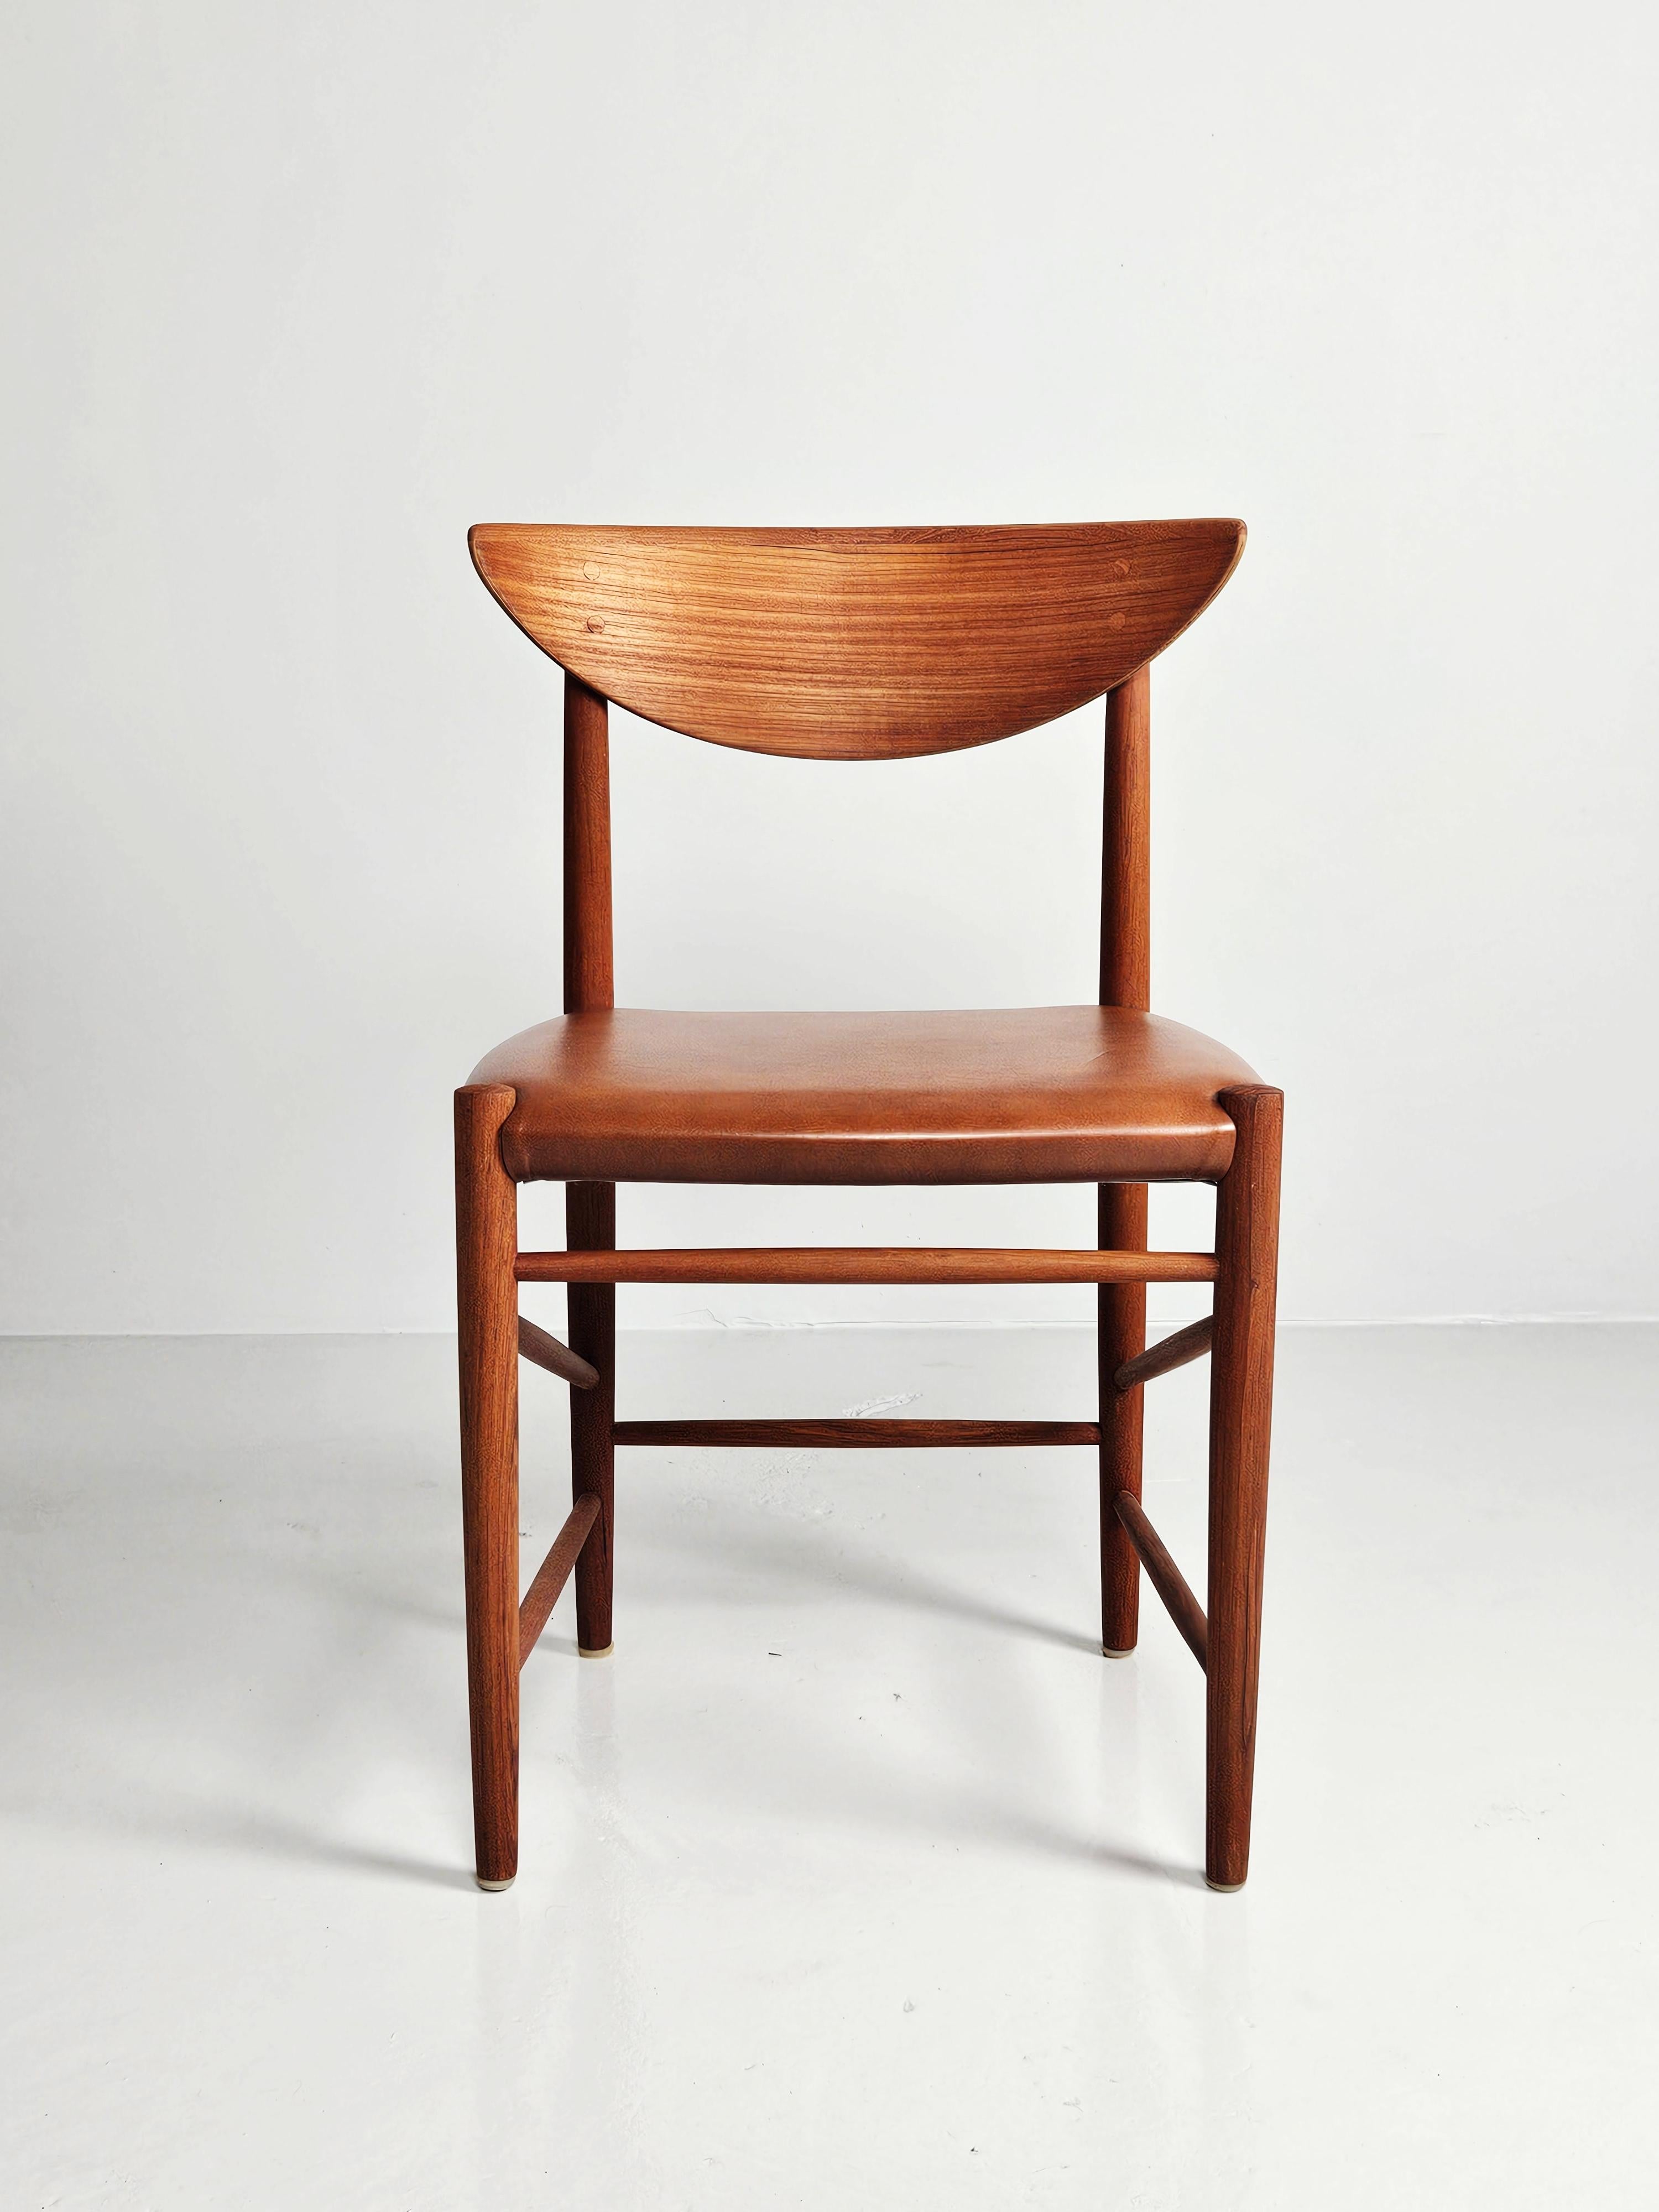 Leather Scandinavian modern dining chair by Peter Hvidt, Denmark, 1950s For Sale